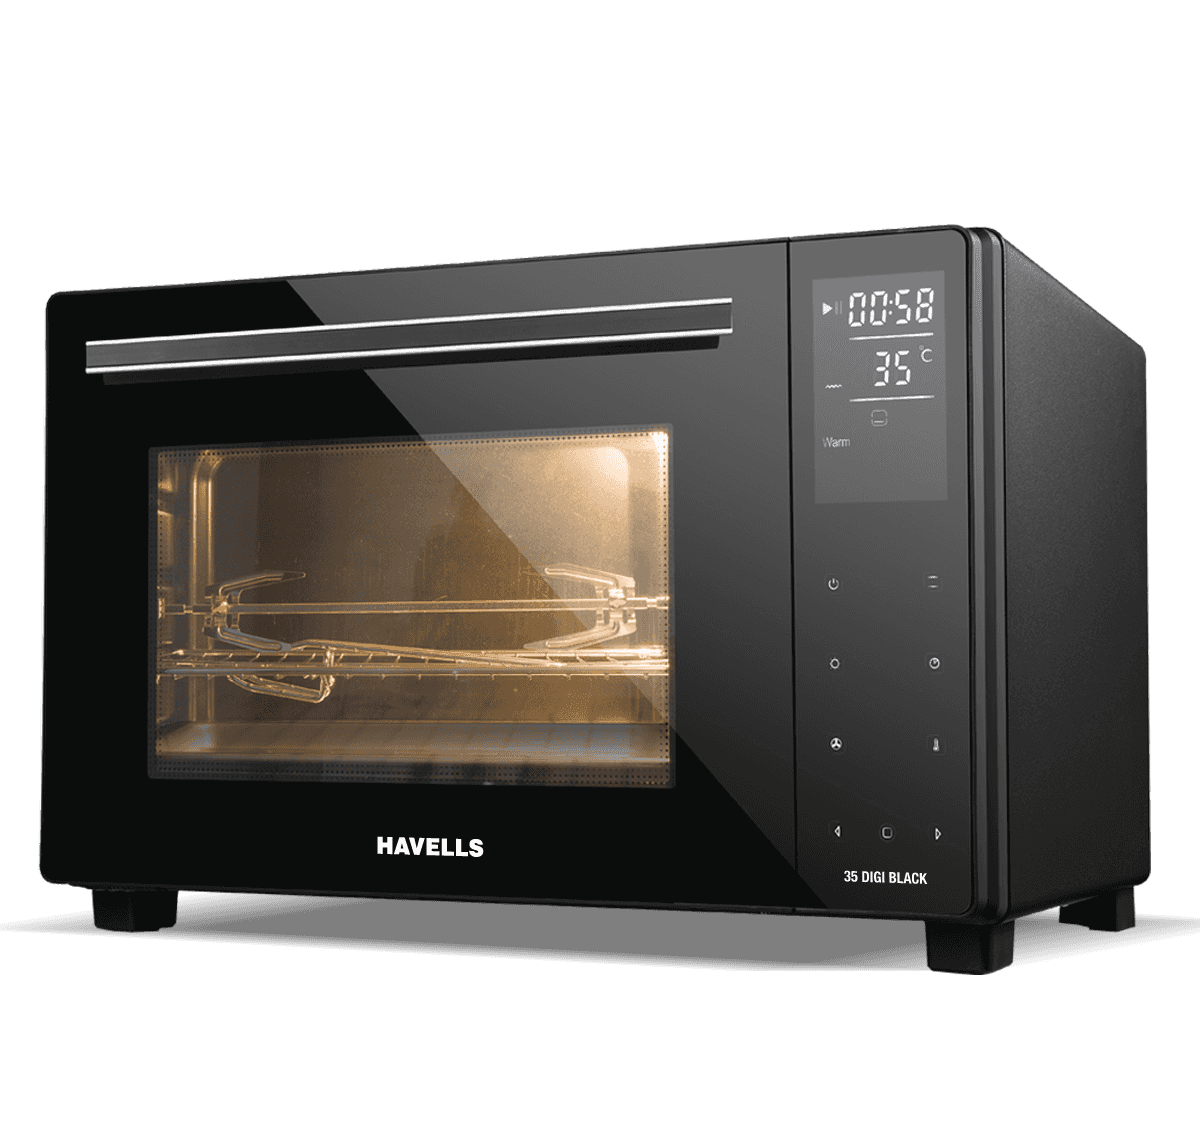 Havells Black Oven Microwave Free HQ Image PNG Image